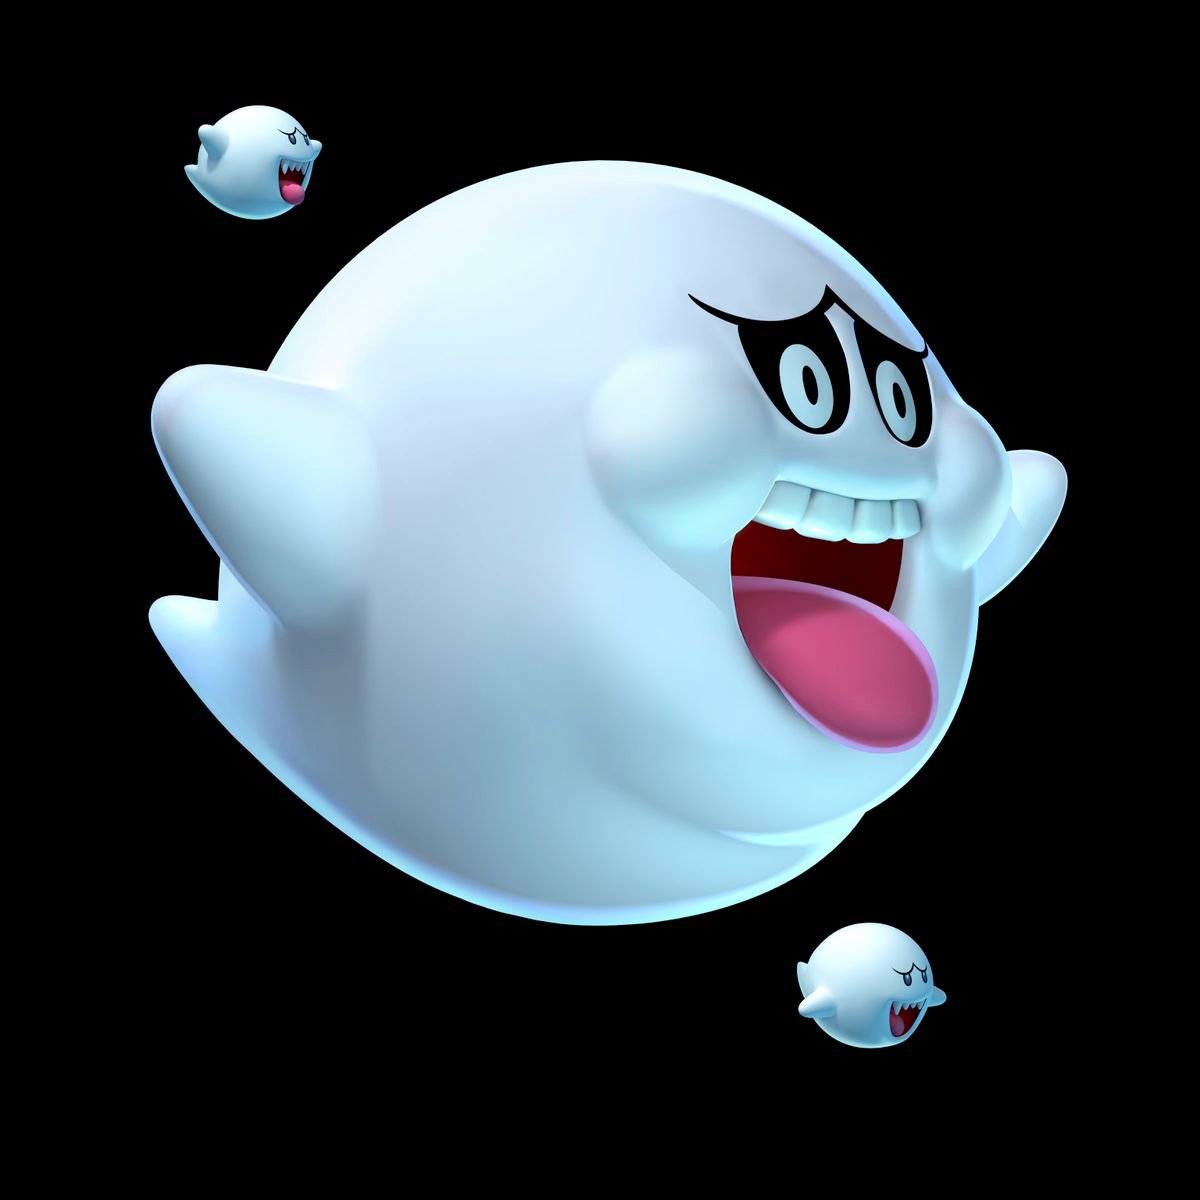 2. It is the largest Boo in the Mario franchise